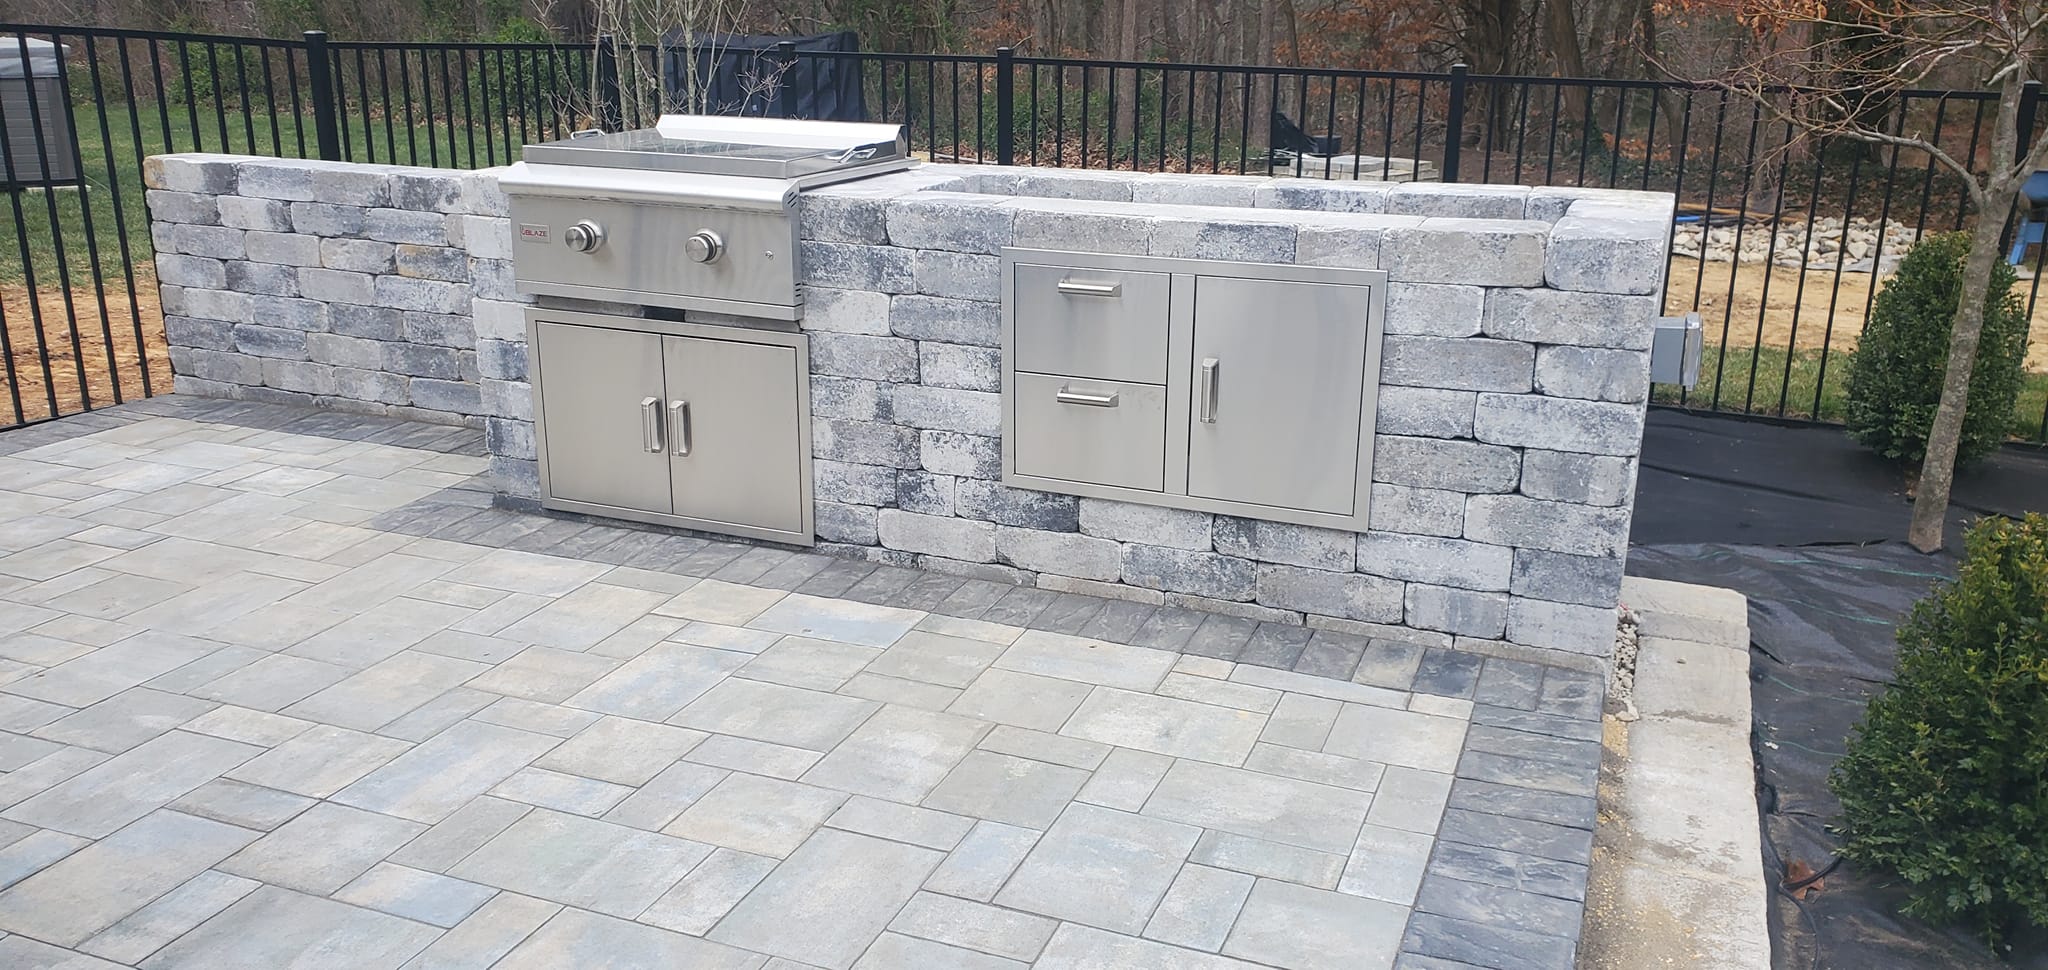 Adam's Lawn & Landscaping Dunkirk Maryland Paver Patio Kitchen